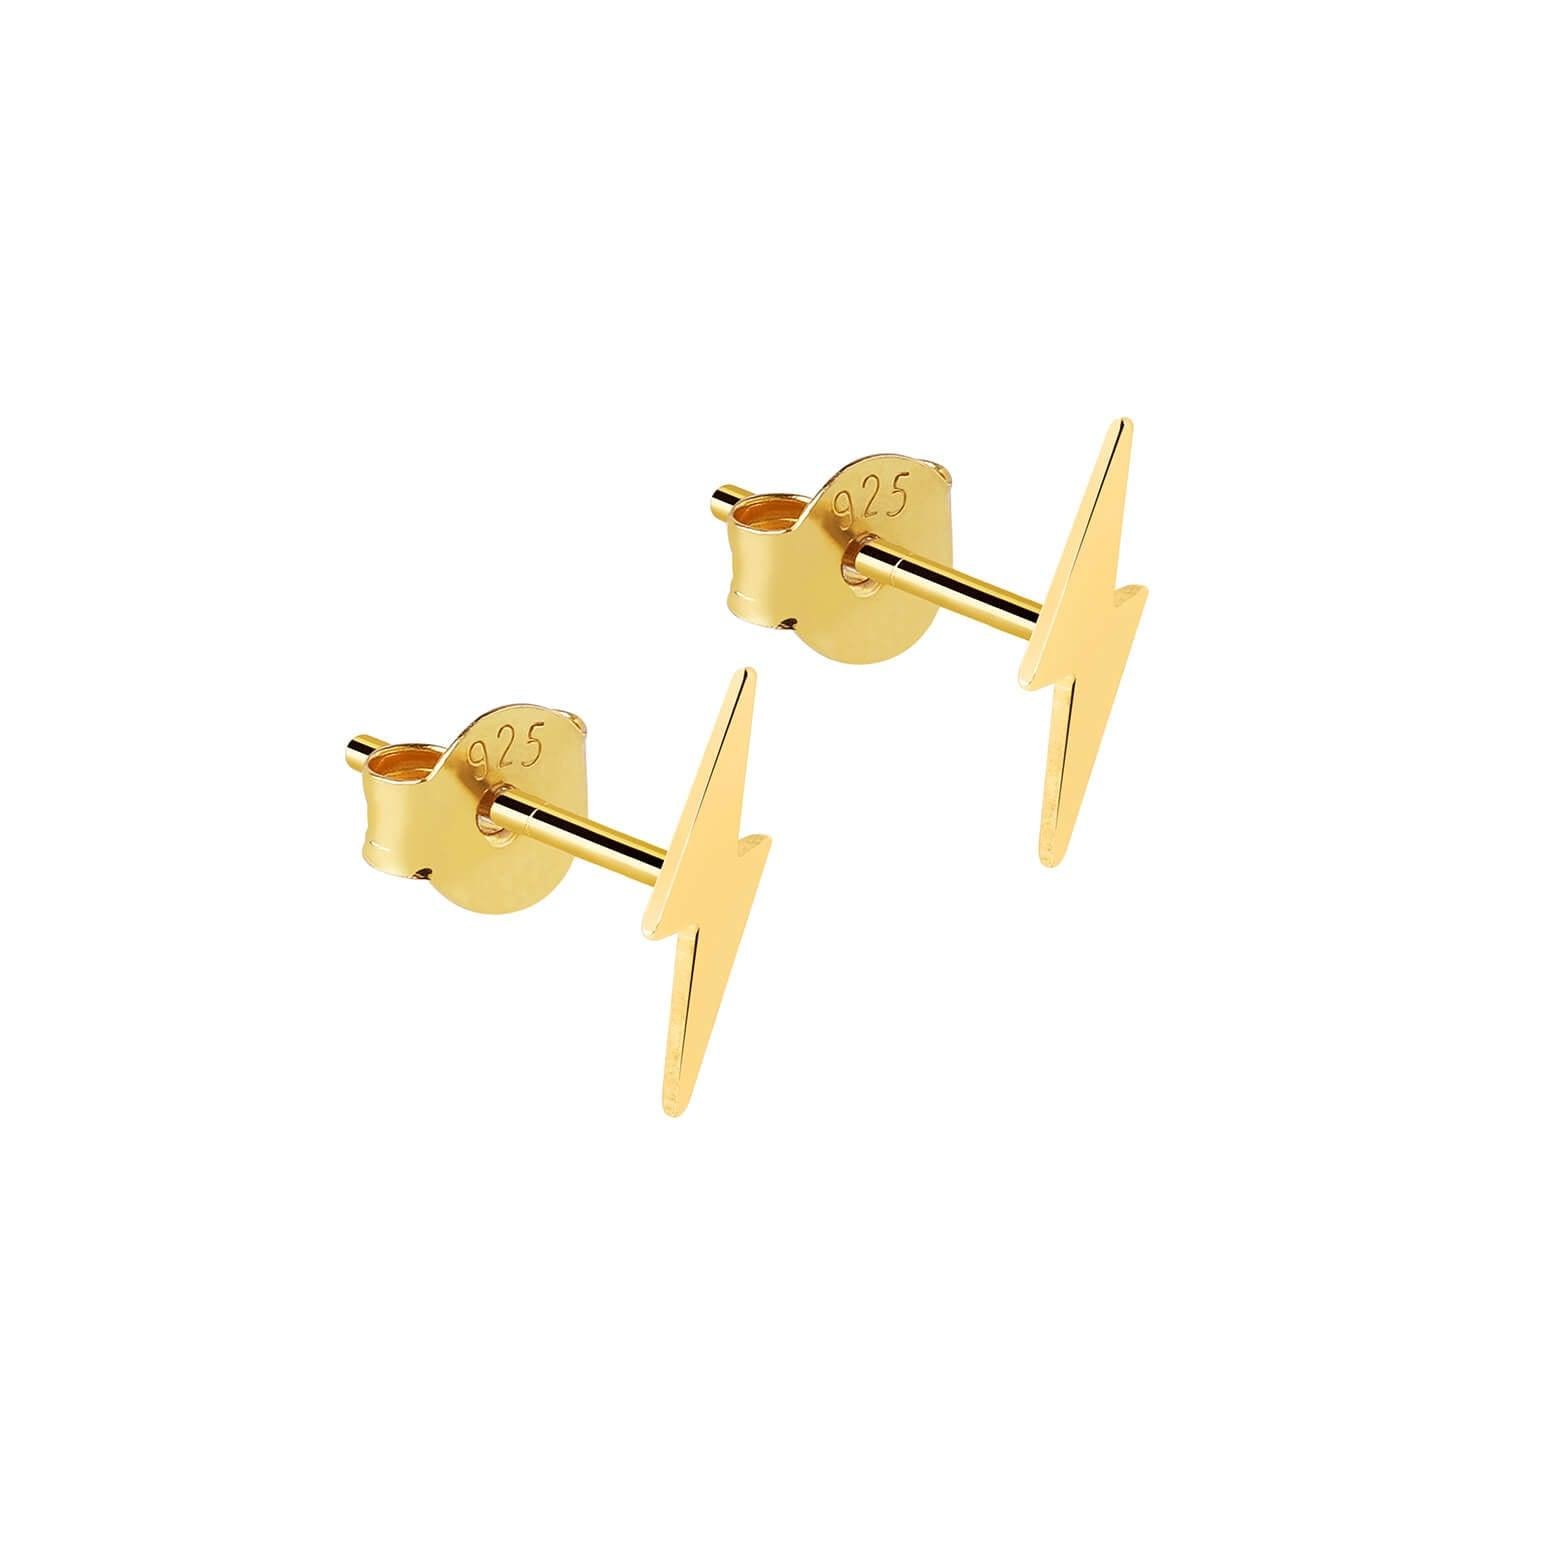 Gold Plated Flash Stud Earrings